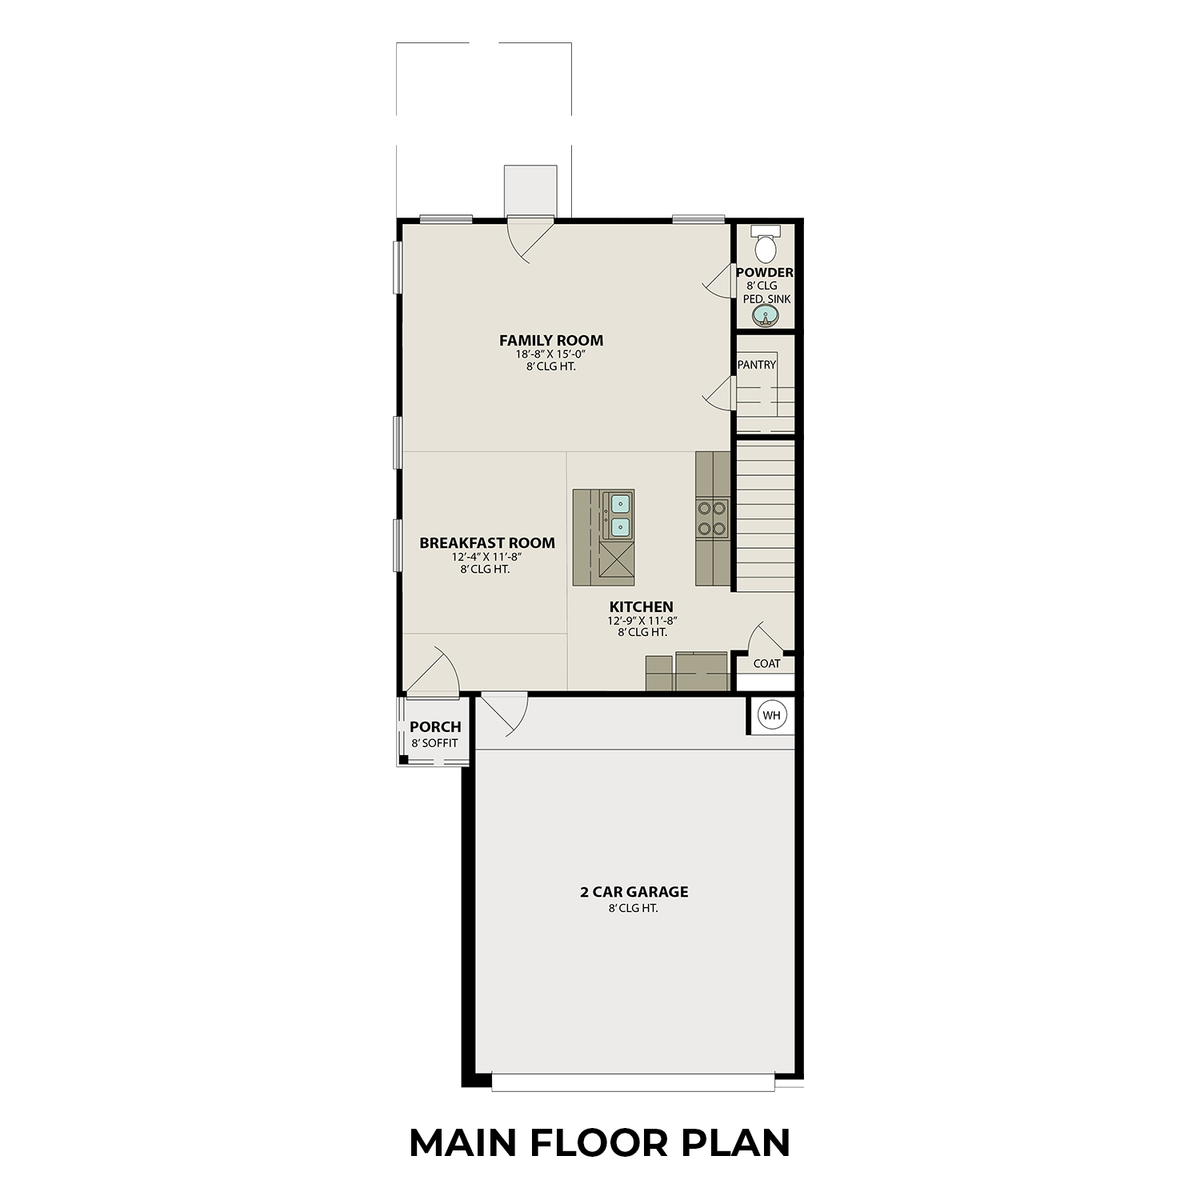 1 - The Lily B floor plan layout for 5235 Shallowhurst Lane in Davidson Homes' Haven at Kieth Harrow community.